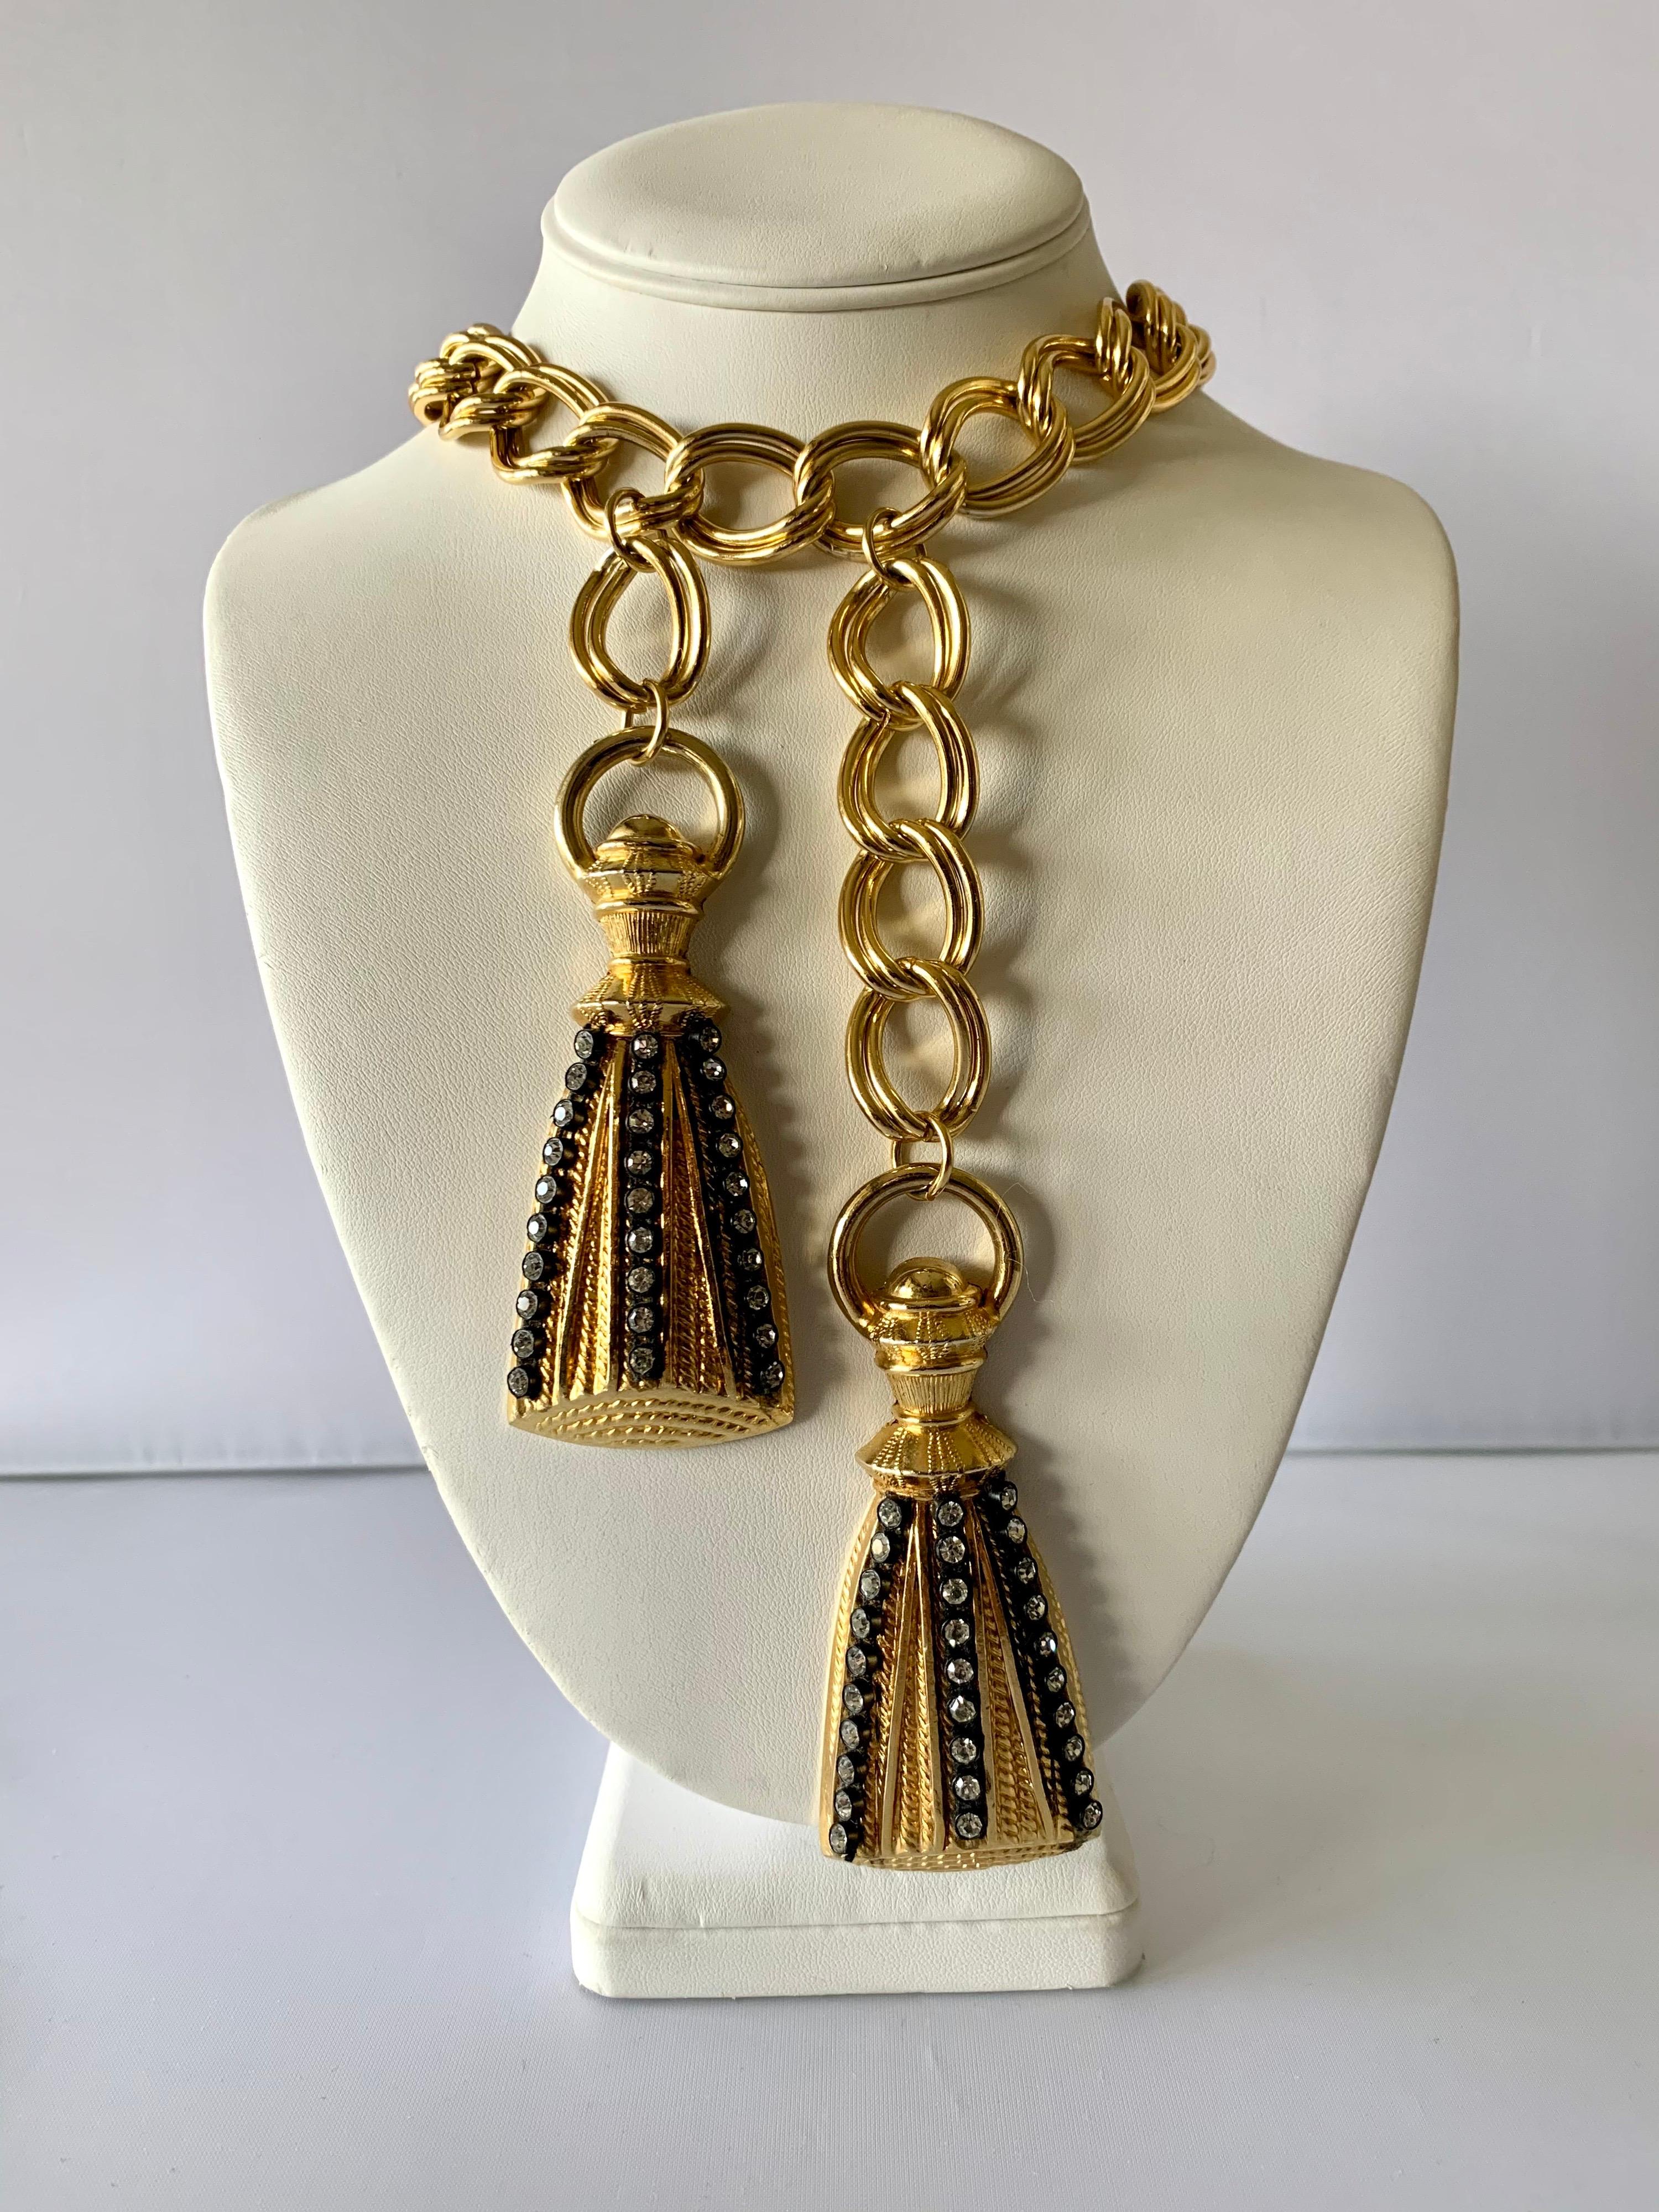 New old stock French gilt-metal tassel versatile necklace featuring a thick gold link chain which is accented by two large cast metal tassels adorned with black enamel and large Swarovski diamante rhinestones. The necklace can also be worn as a belt